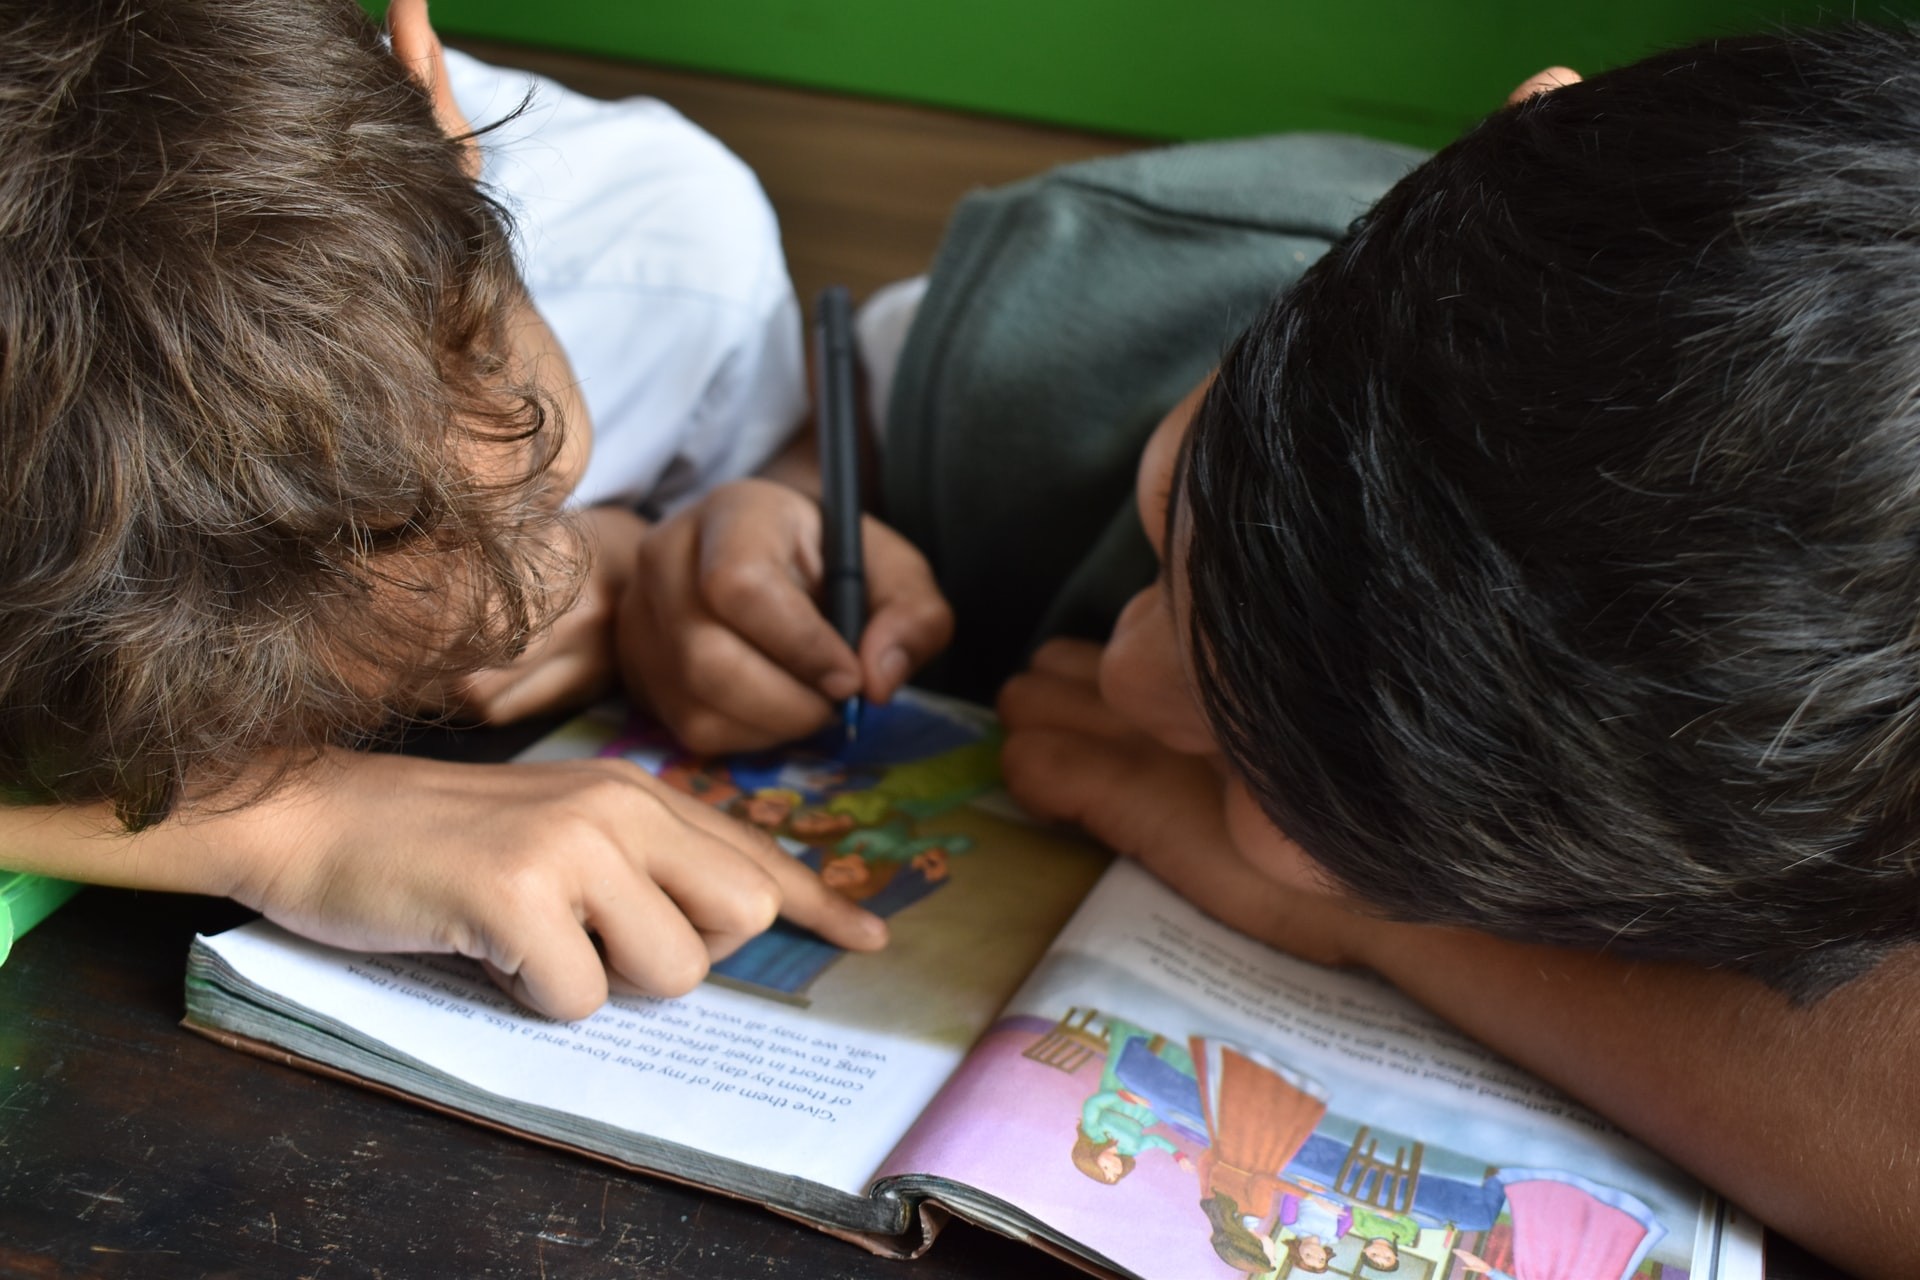 Two boys go through a reading assignment as part of an English games activity.